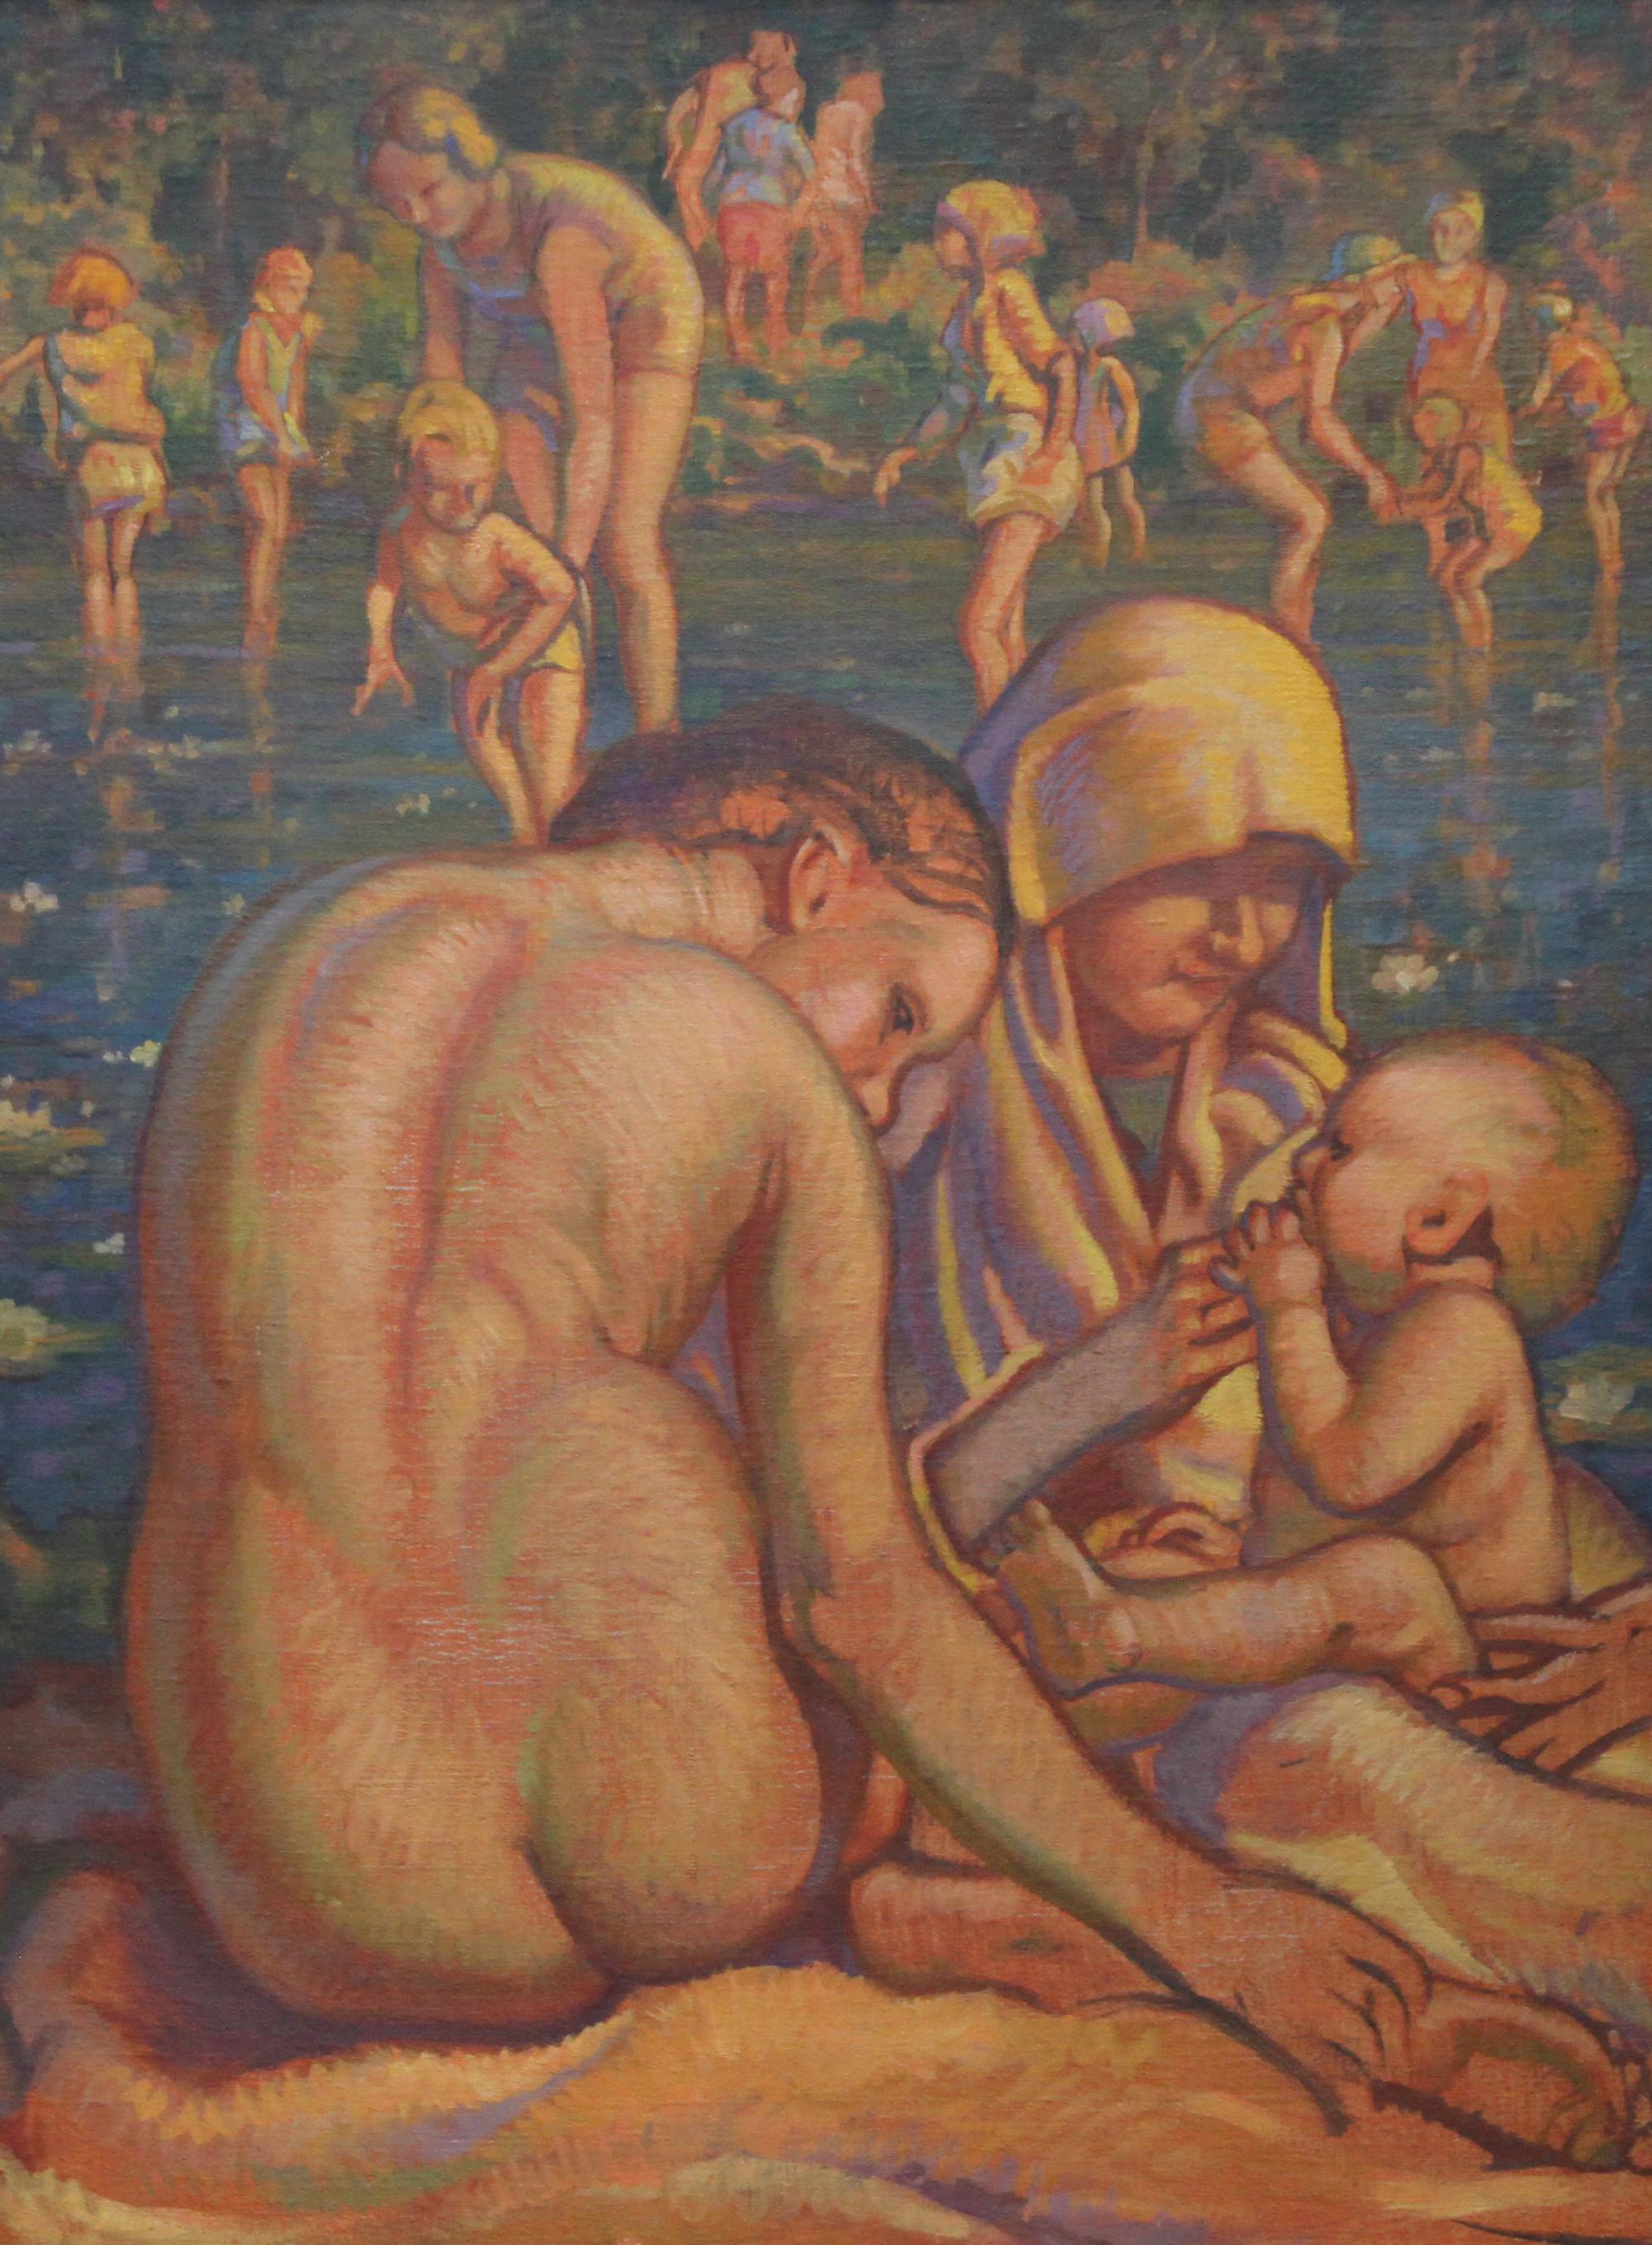 Mother and Child Bathing - British Slade School 30's Art Deco nude oil painting - Painting by Unknown